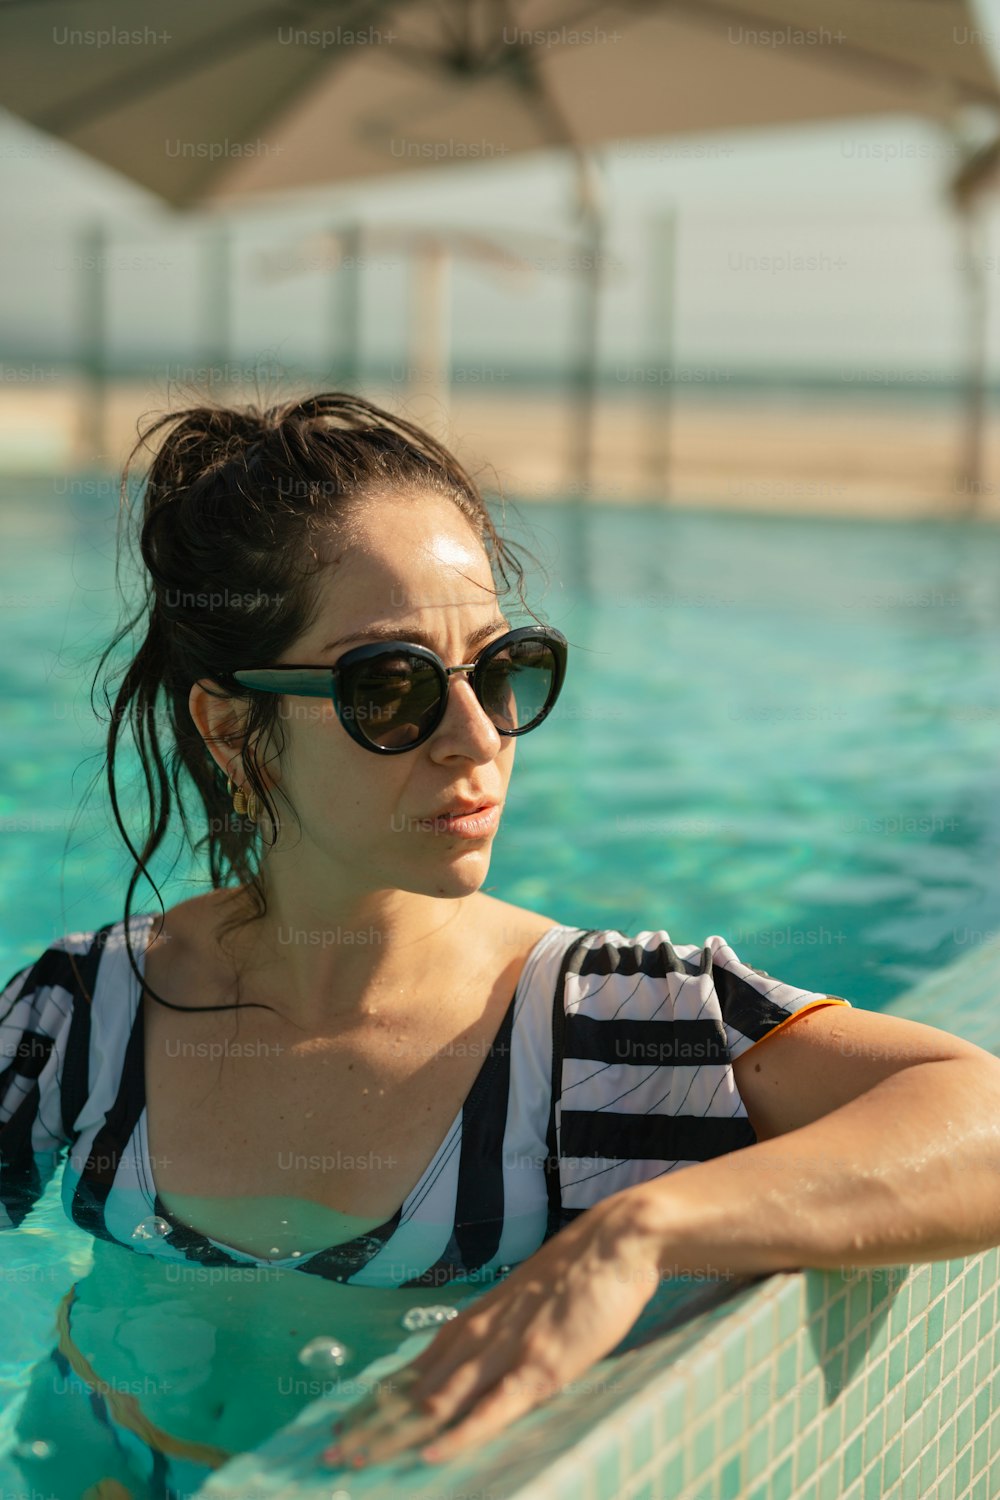 a woman in a pool wearing sunglasses and a striped shirt